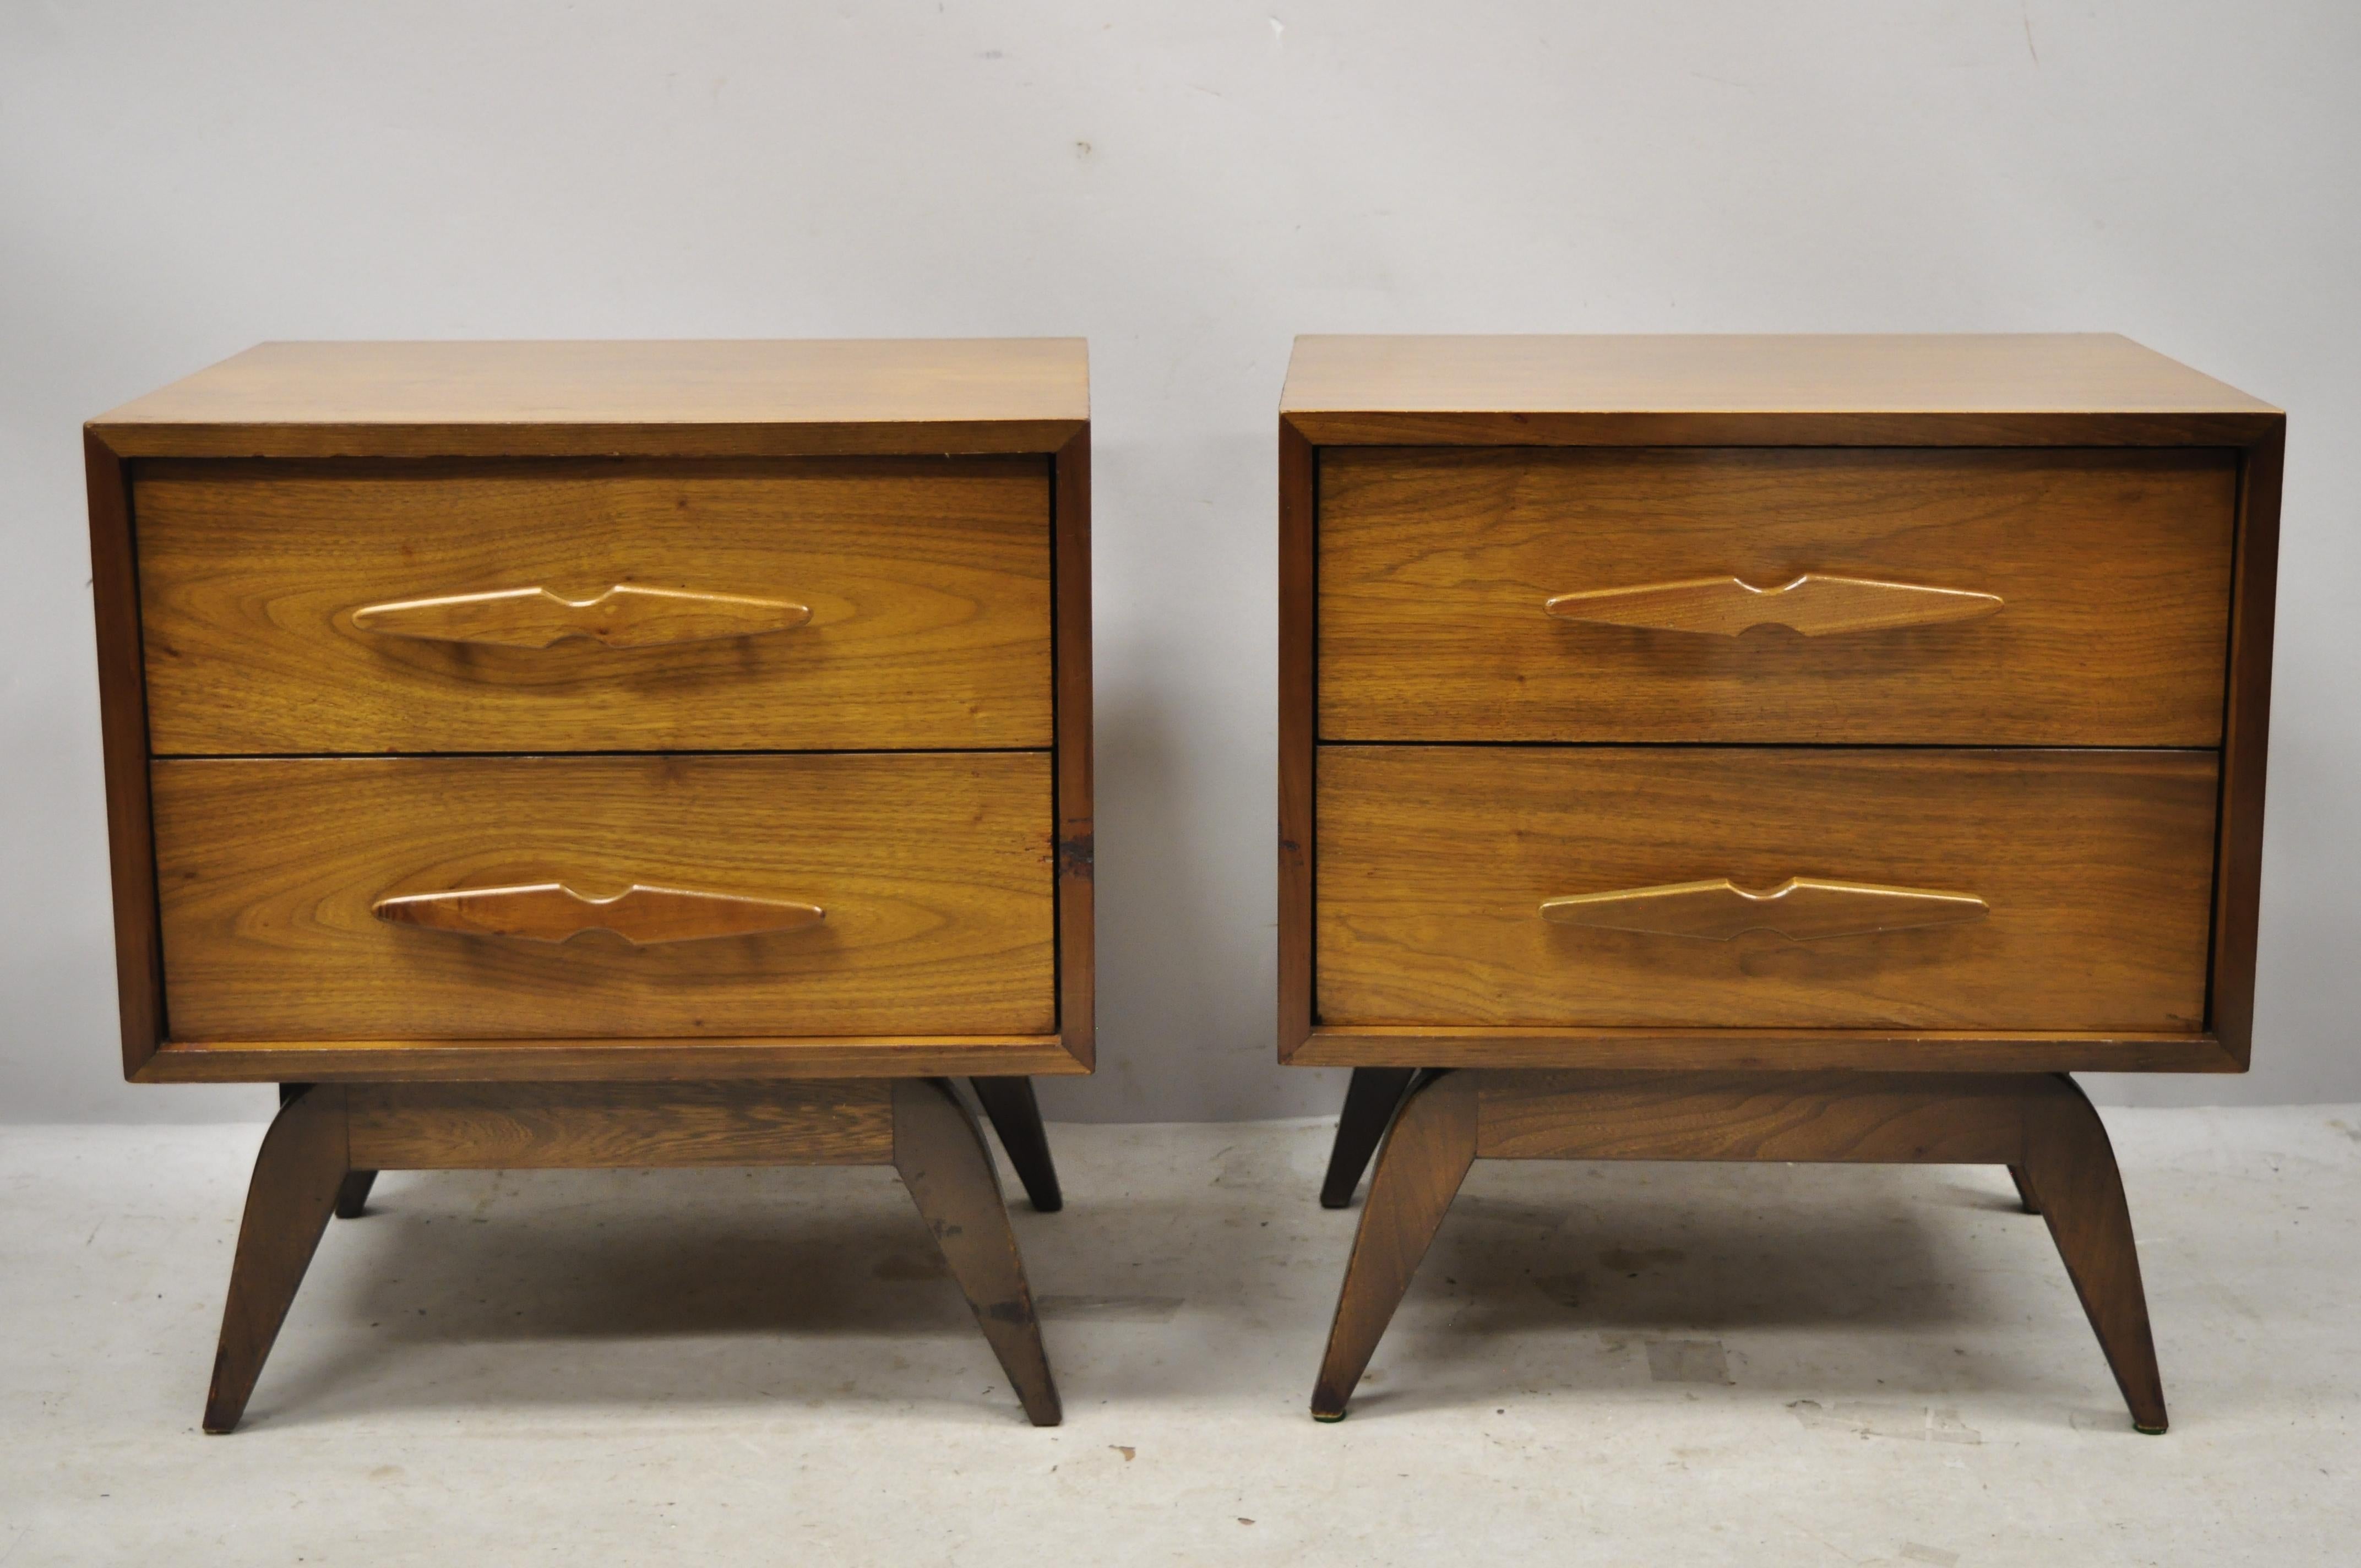 Vintage Mid-Century Modern sculpted walnut two-drawer nightstands bedside tables - a pair. Item features carved wood pulls, brass accents, beautiful wood grain, tapered legs, clean modernist lines, great style and form, circa mid-20th century.